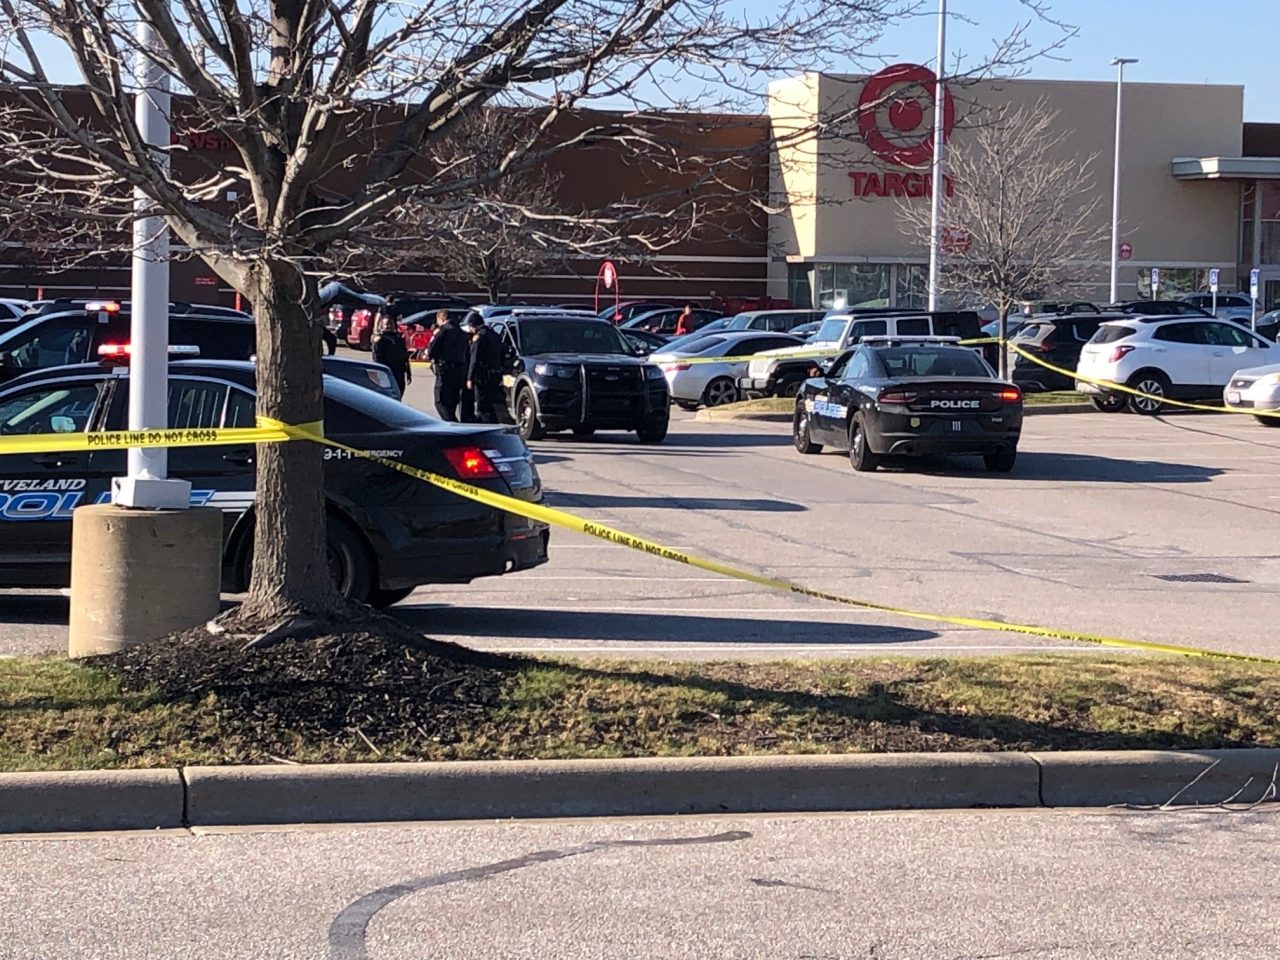  Cleveland Target shooting: Police give new details 